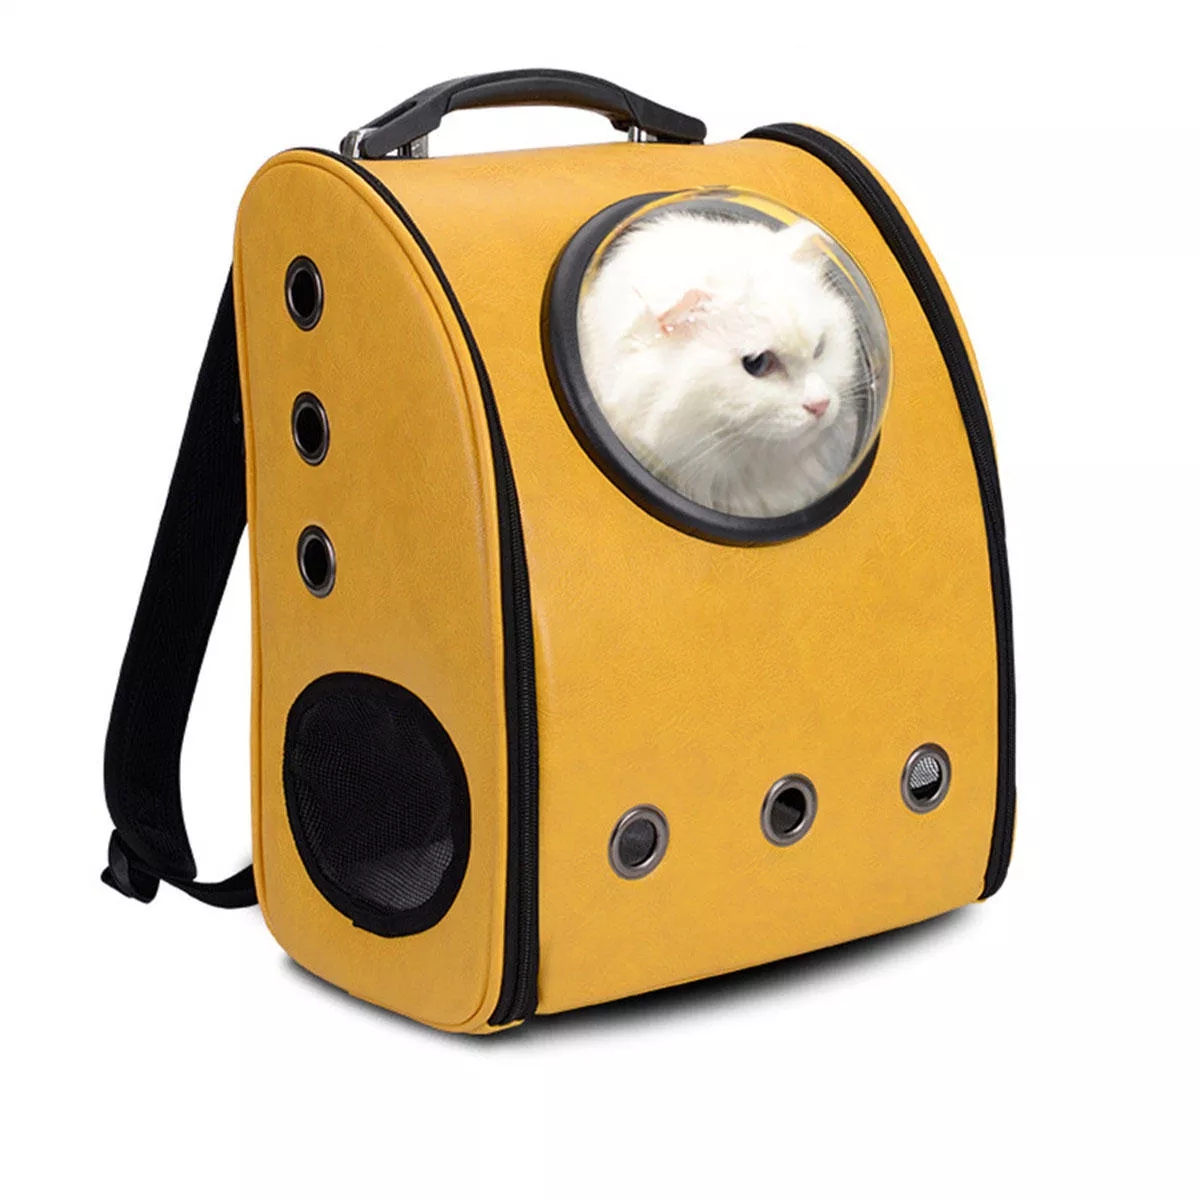 Pet-Astronaut-Capsule-Backpack-Portable-Outdoor-Pet-Bag-Breathable-Cat-Dog-Backpack-1521332-10